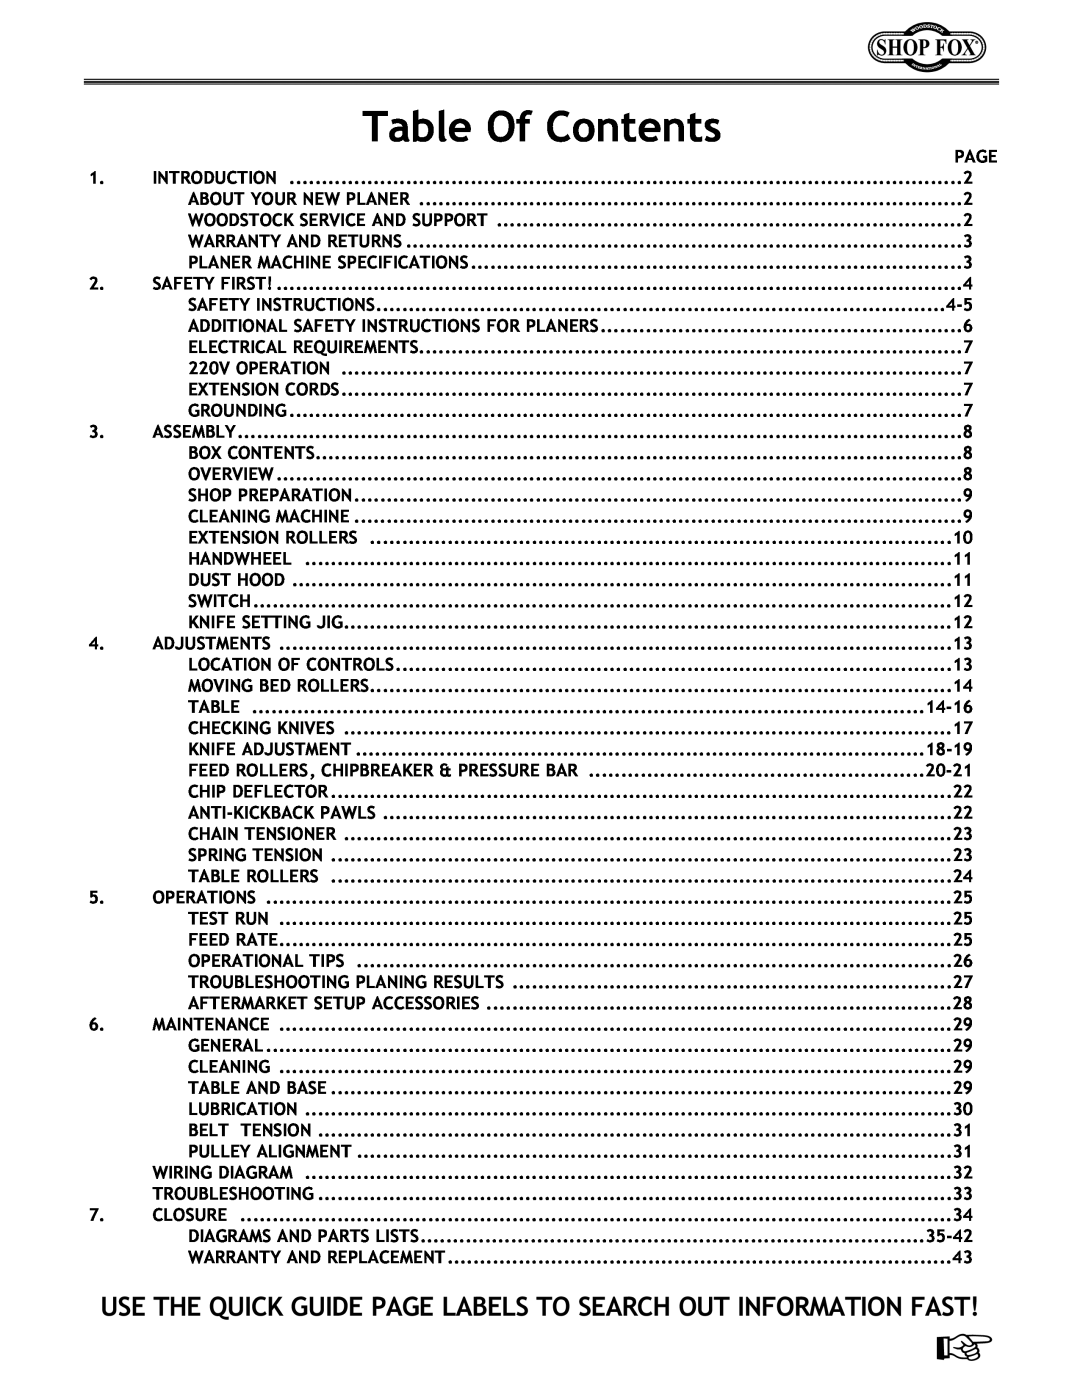 Woodstock W1683 Table Of Contents, Use The Quick Guide Page Labels To Search Out Information Fast, Introduction, Grounding 